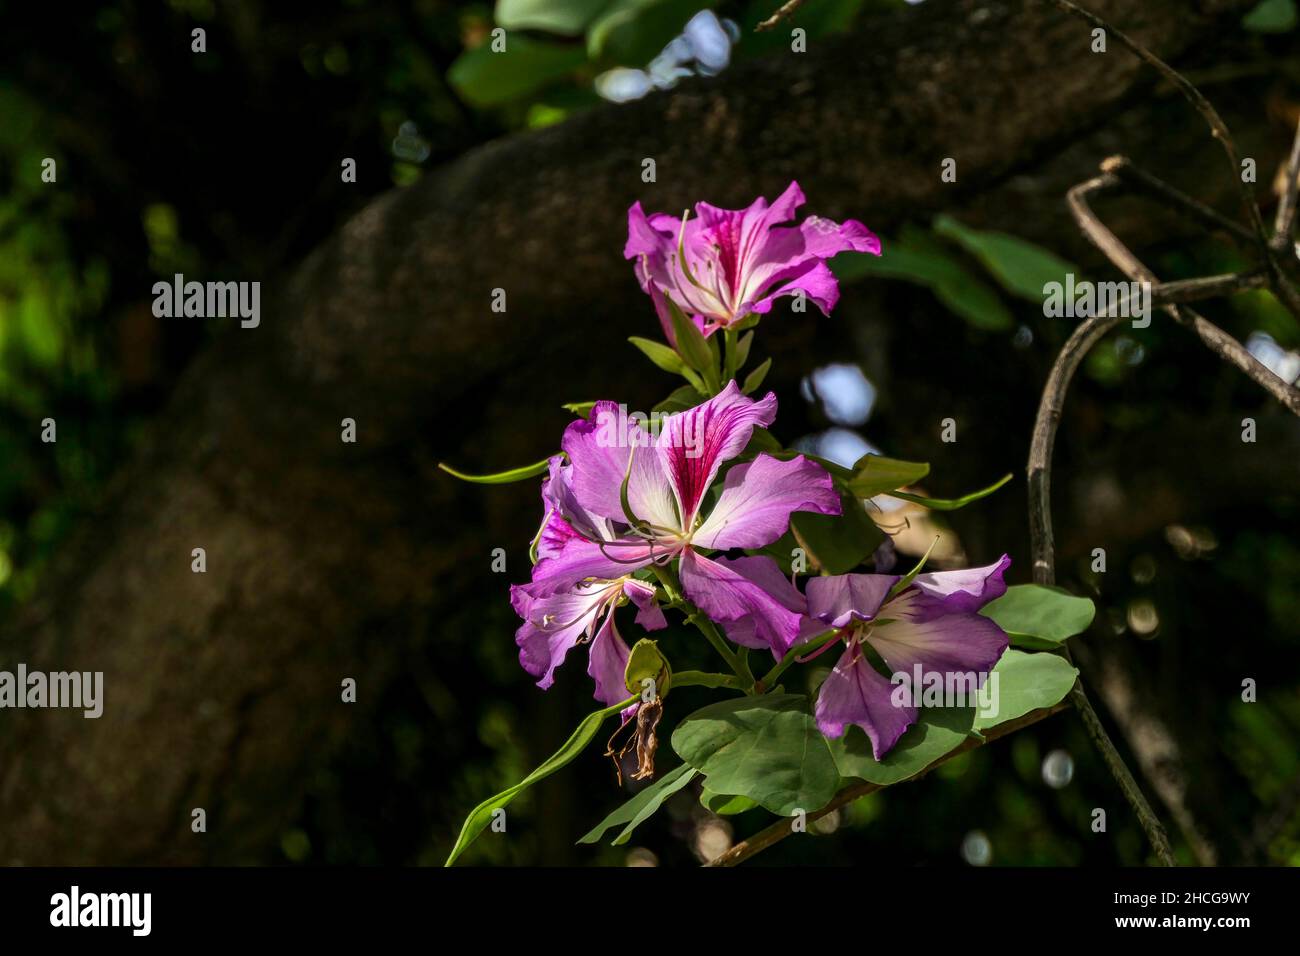 Pink flowers of the Orchid tree closeup on a dark blurred background. Bauhinia Stock Photo